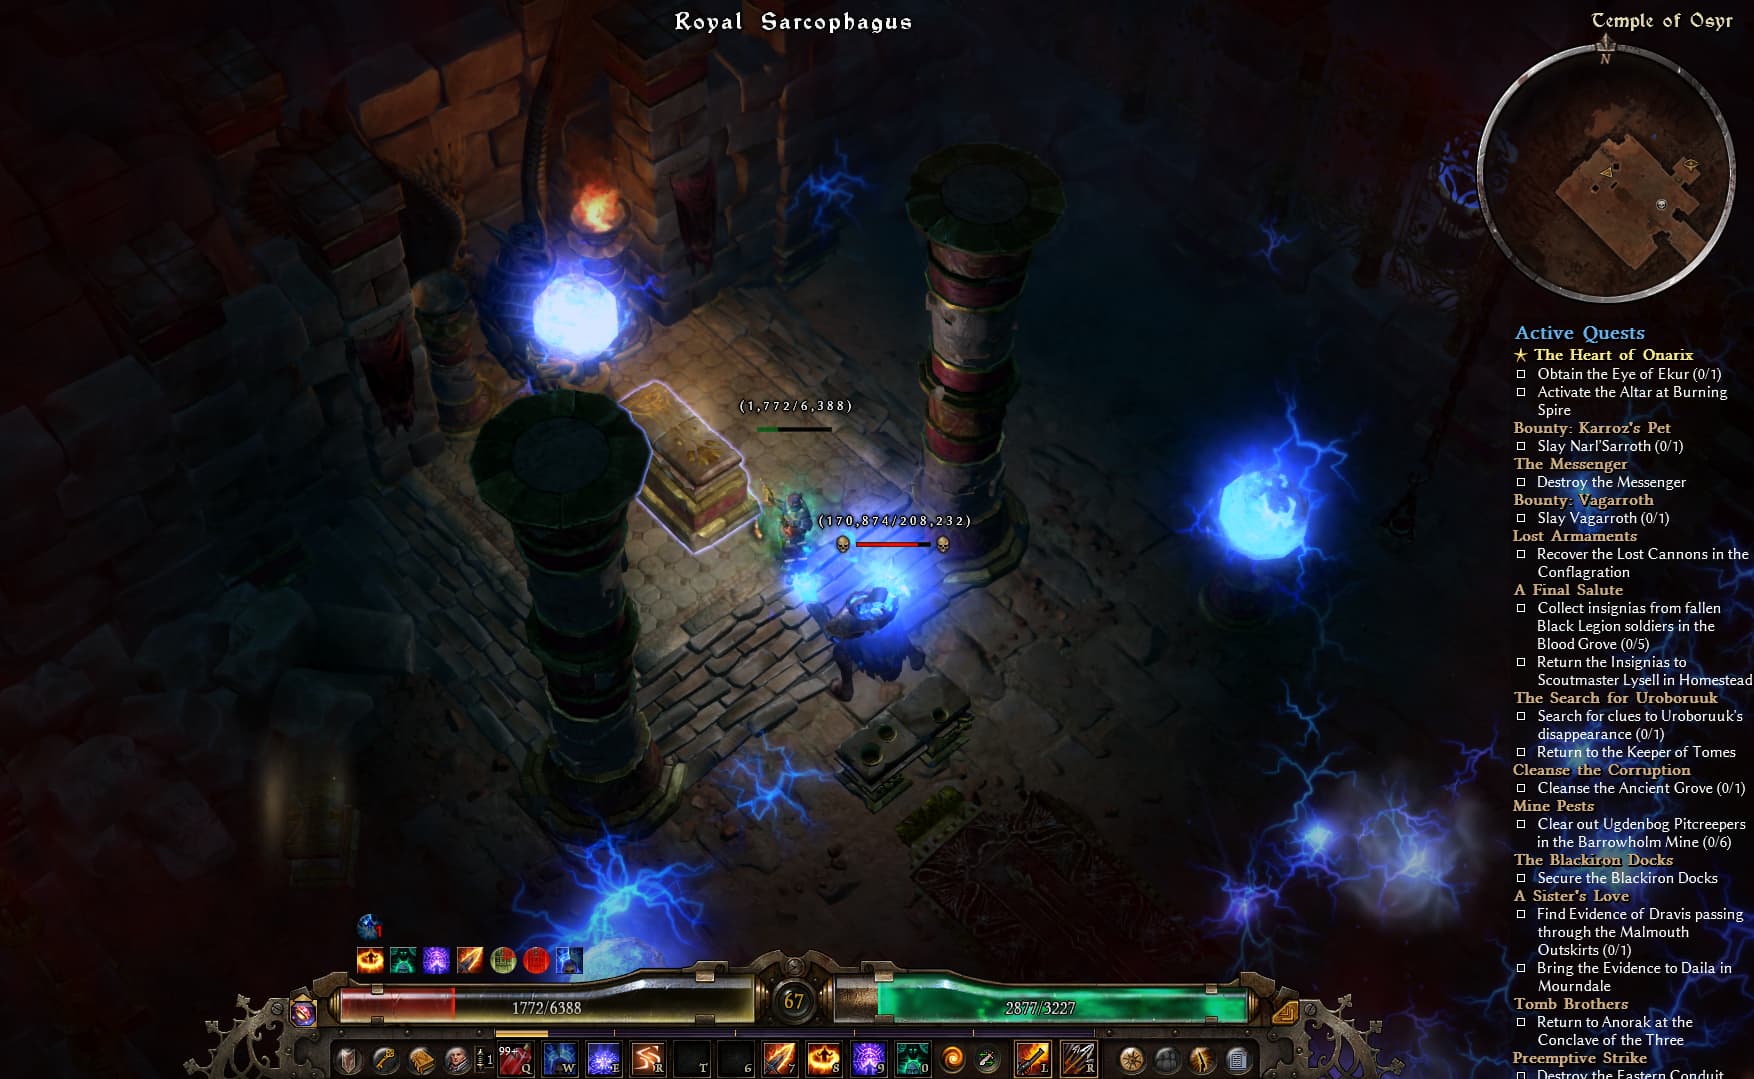 Hit a Brick Wall: Can't get Eye of Ekur to drop (Sarcophagus is